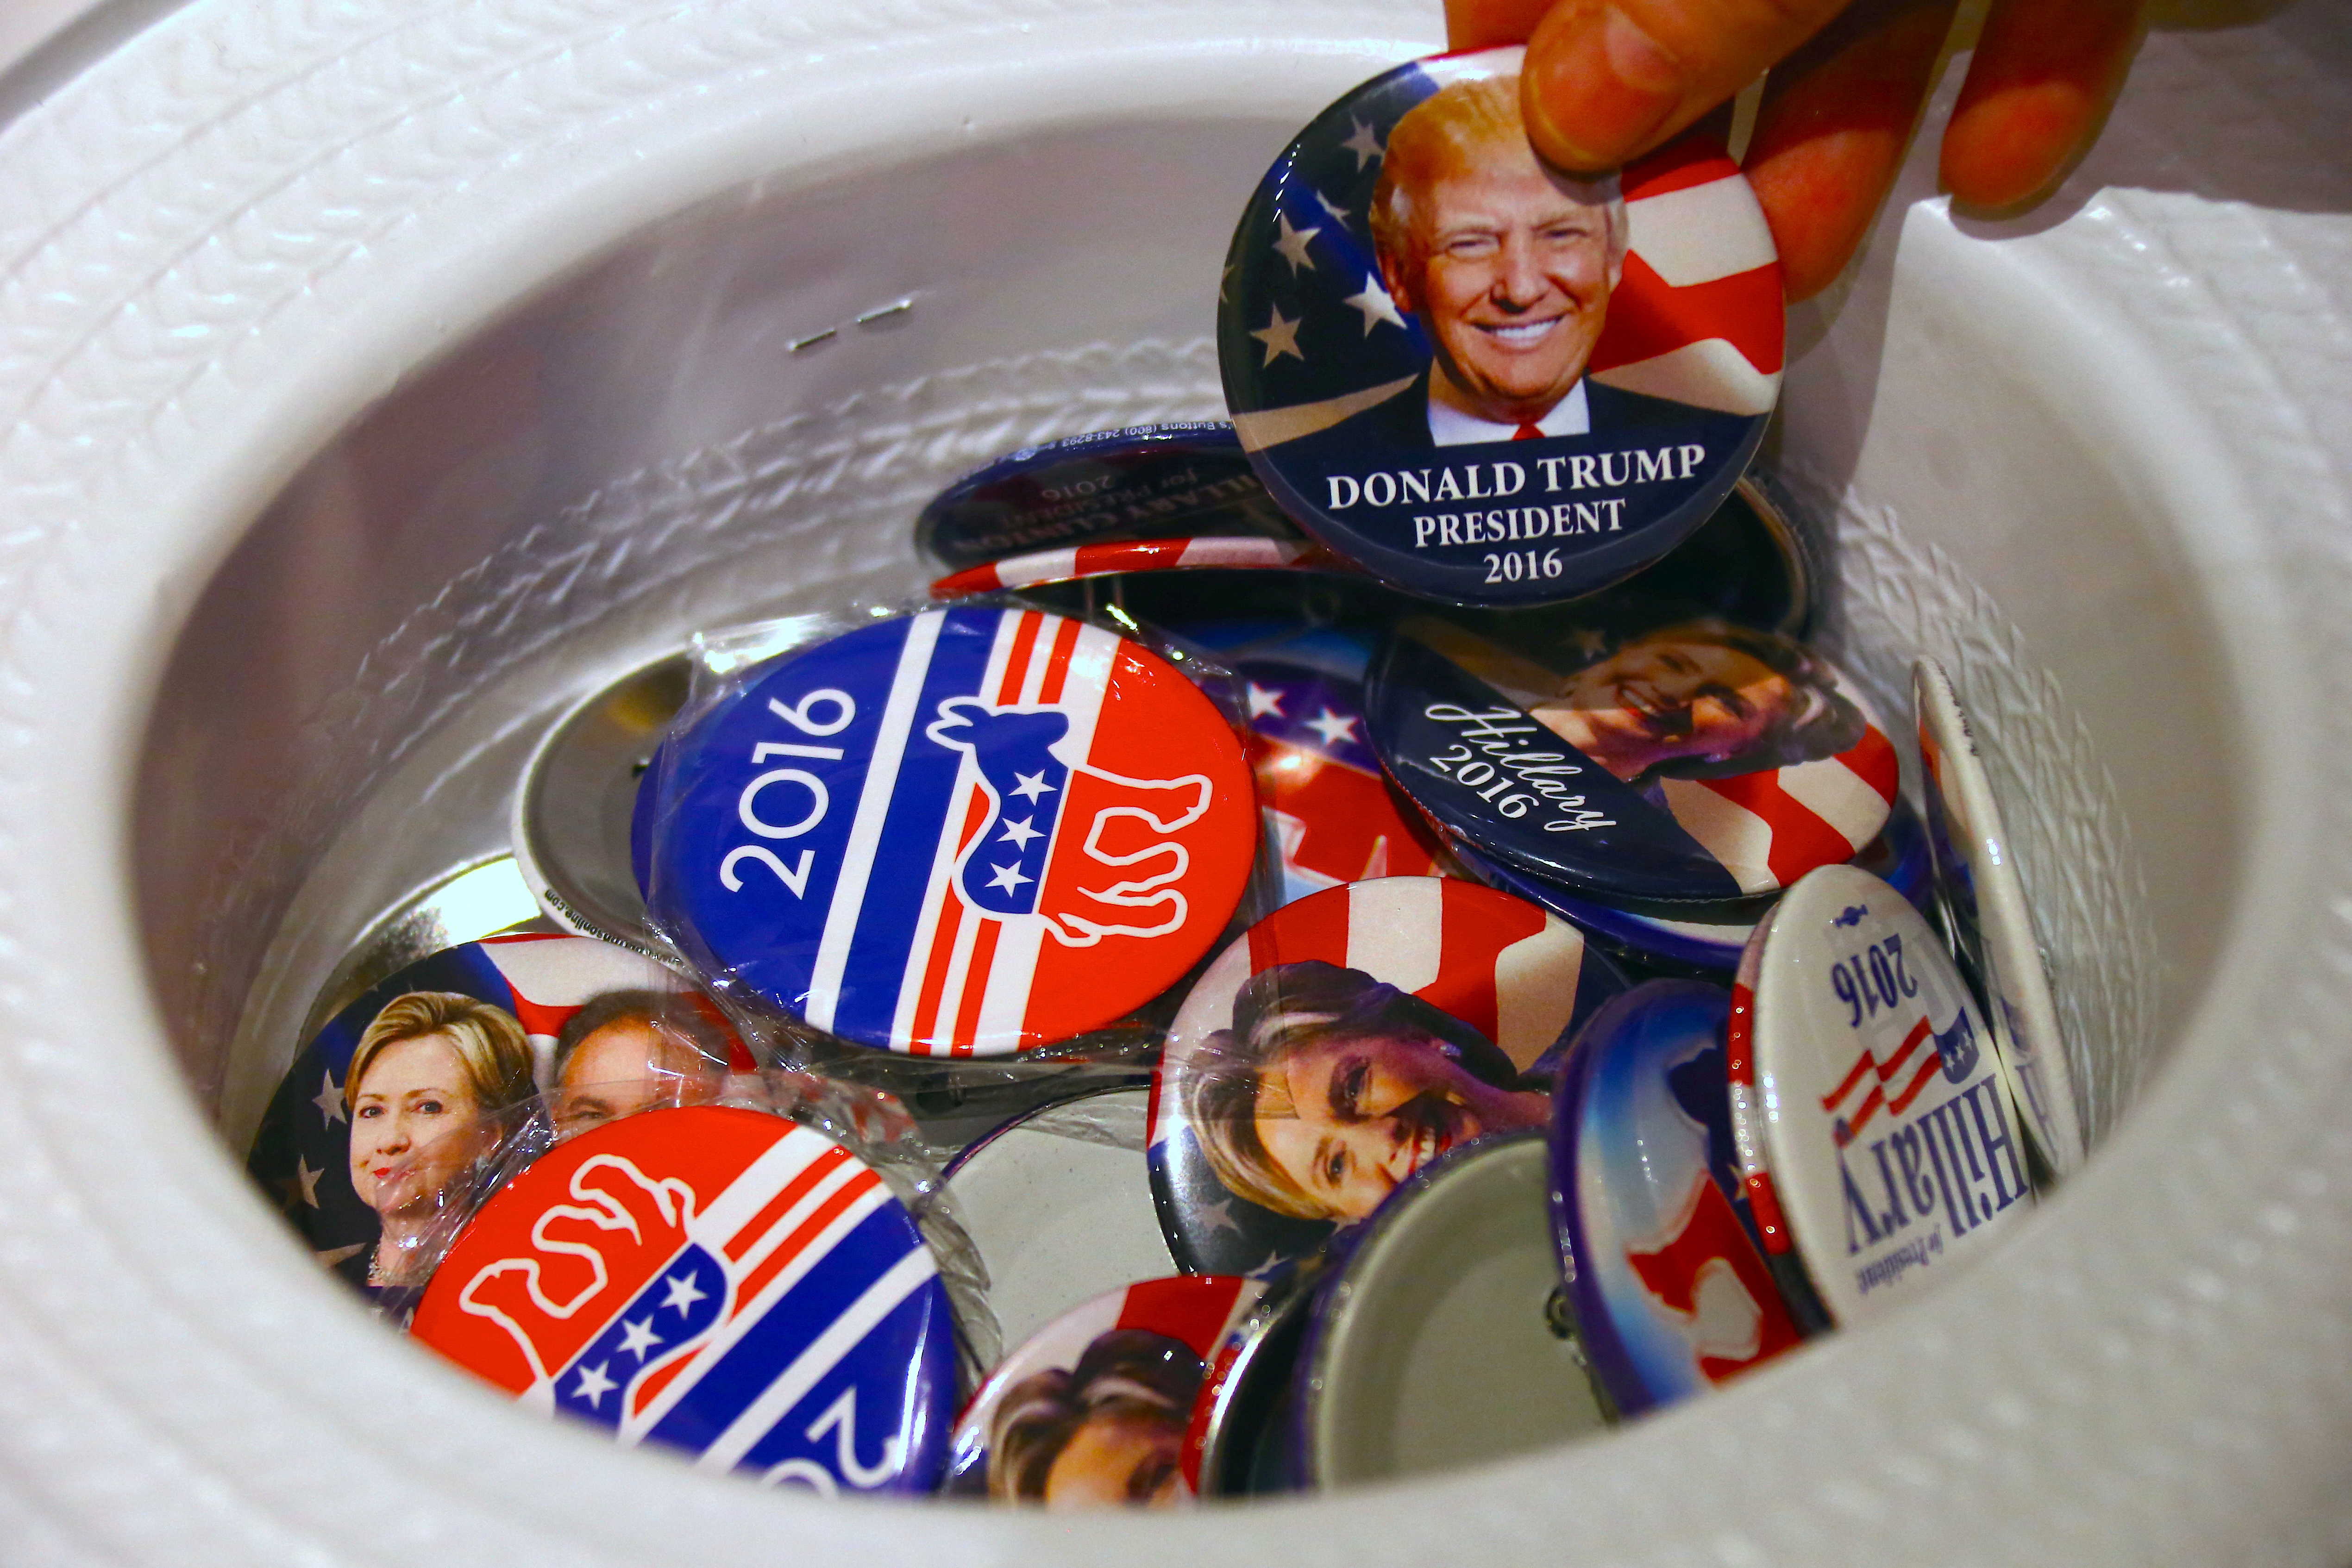 A guest at an event called the U.S. Presidential Election Watch, organised by the U.S. Consulate, reaches for a badge from out of a hat displaying photographs of Republican candidate Donald Trump and Democratic candidate Hillary Clinton, in Syd